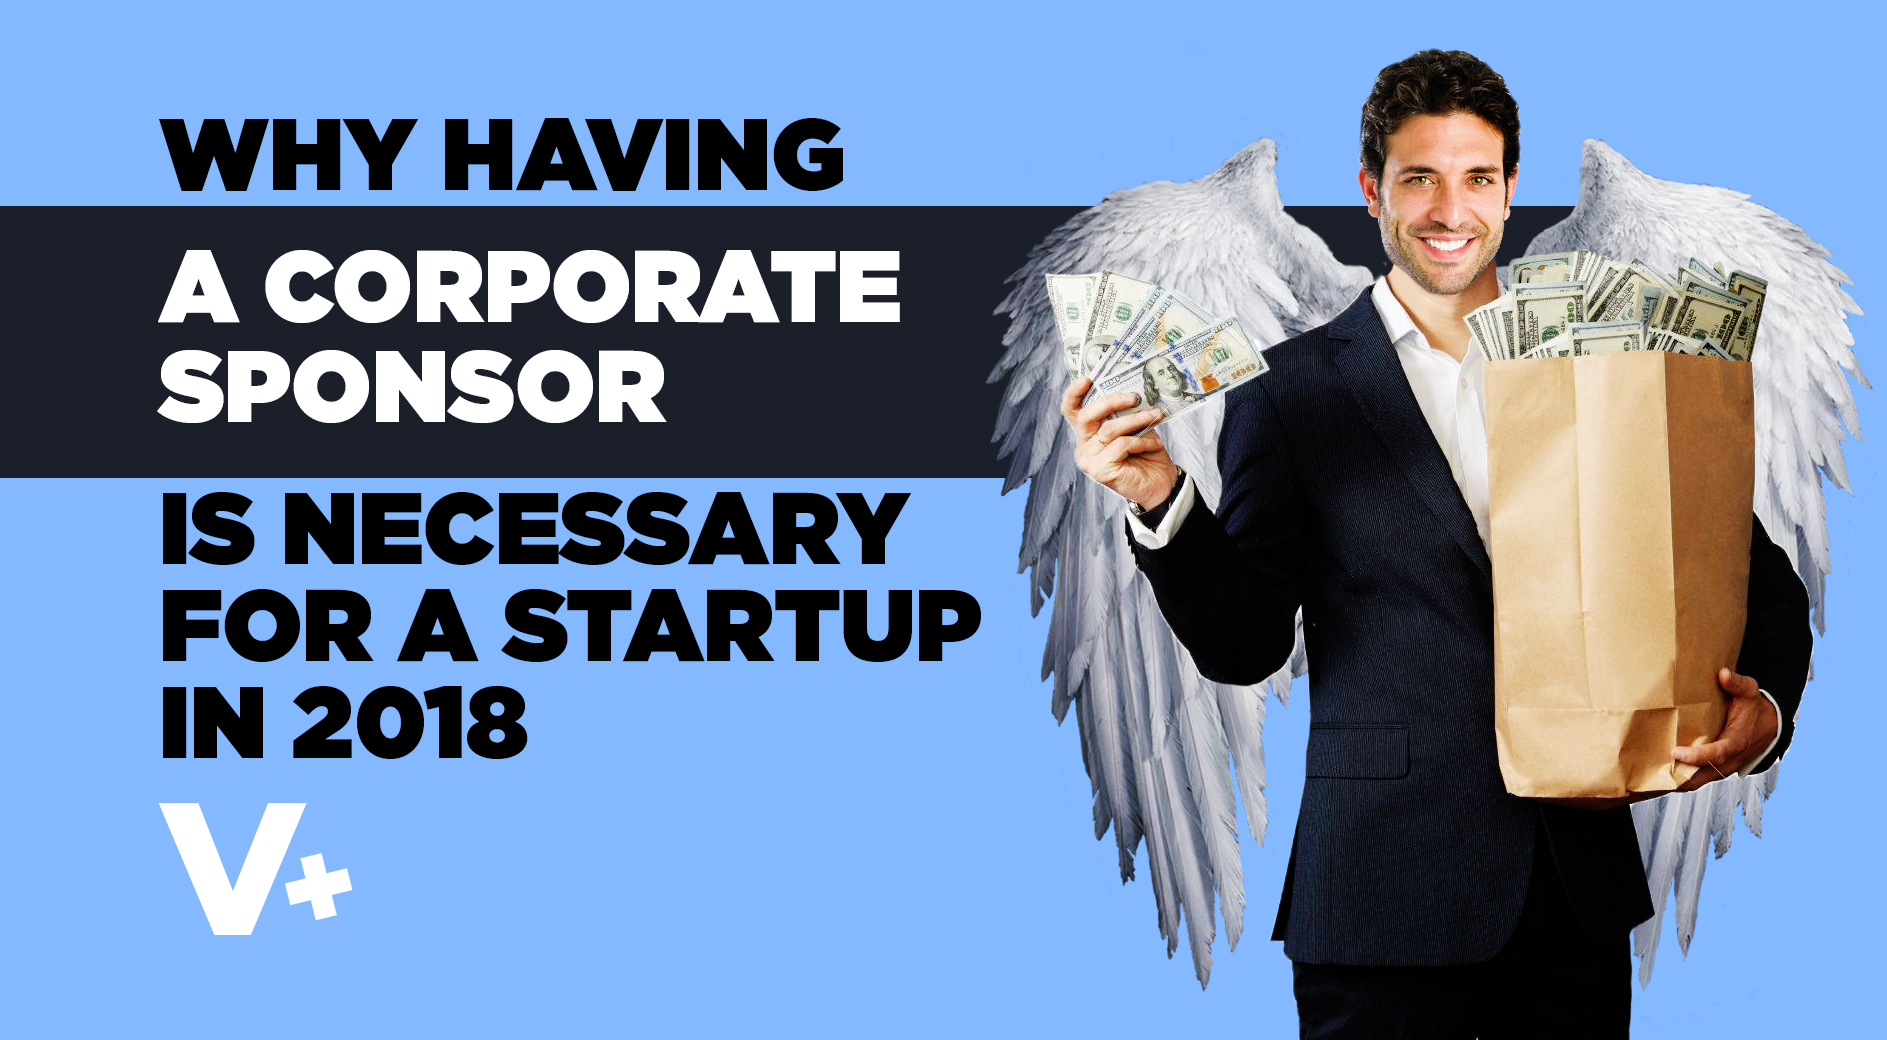 Why Having Corporate Sponsors for a Startup Business is Necessary